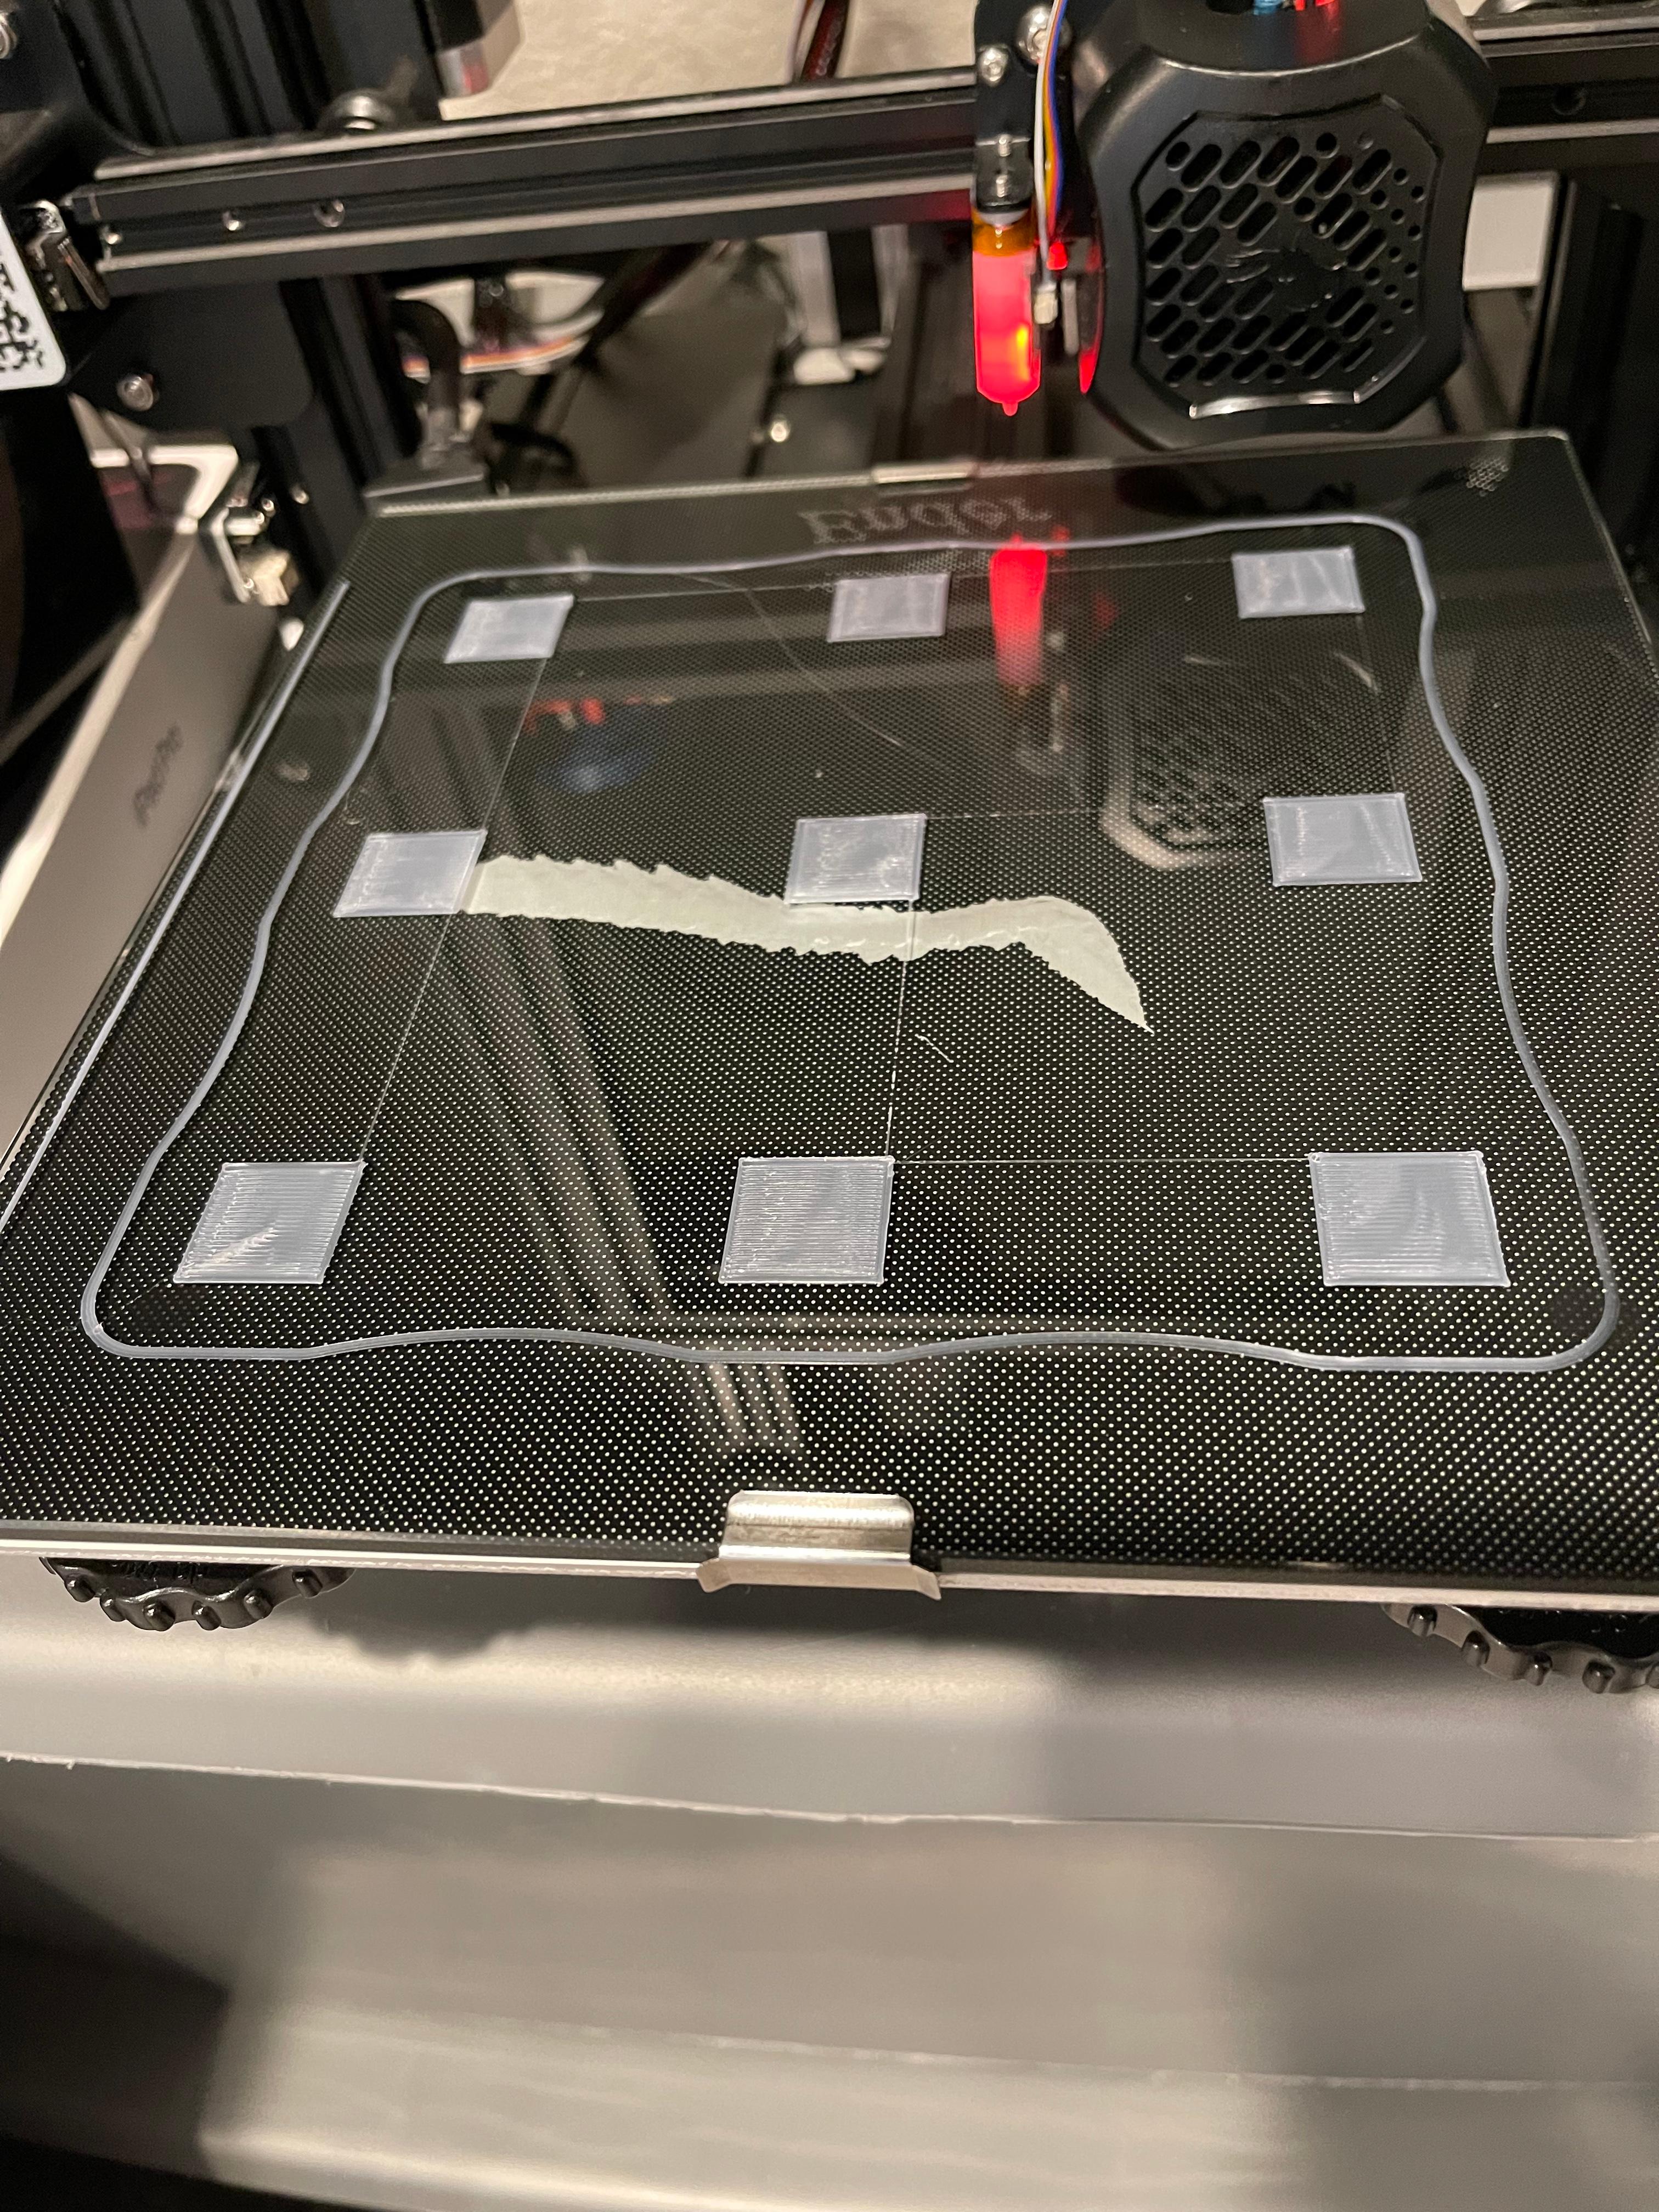 Perfect 1st layers! Ender 3 v2, Ender 3S1, Ender 3S1 Pro - 3x3 Calibration Bed Leveling Squares optimized for Professional firmware with UBL - Super effective and fast print that allowed me to dial stuff in without a serious time/filament commitment. - 3d model